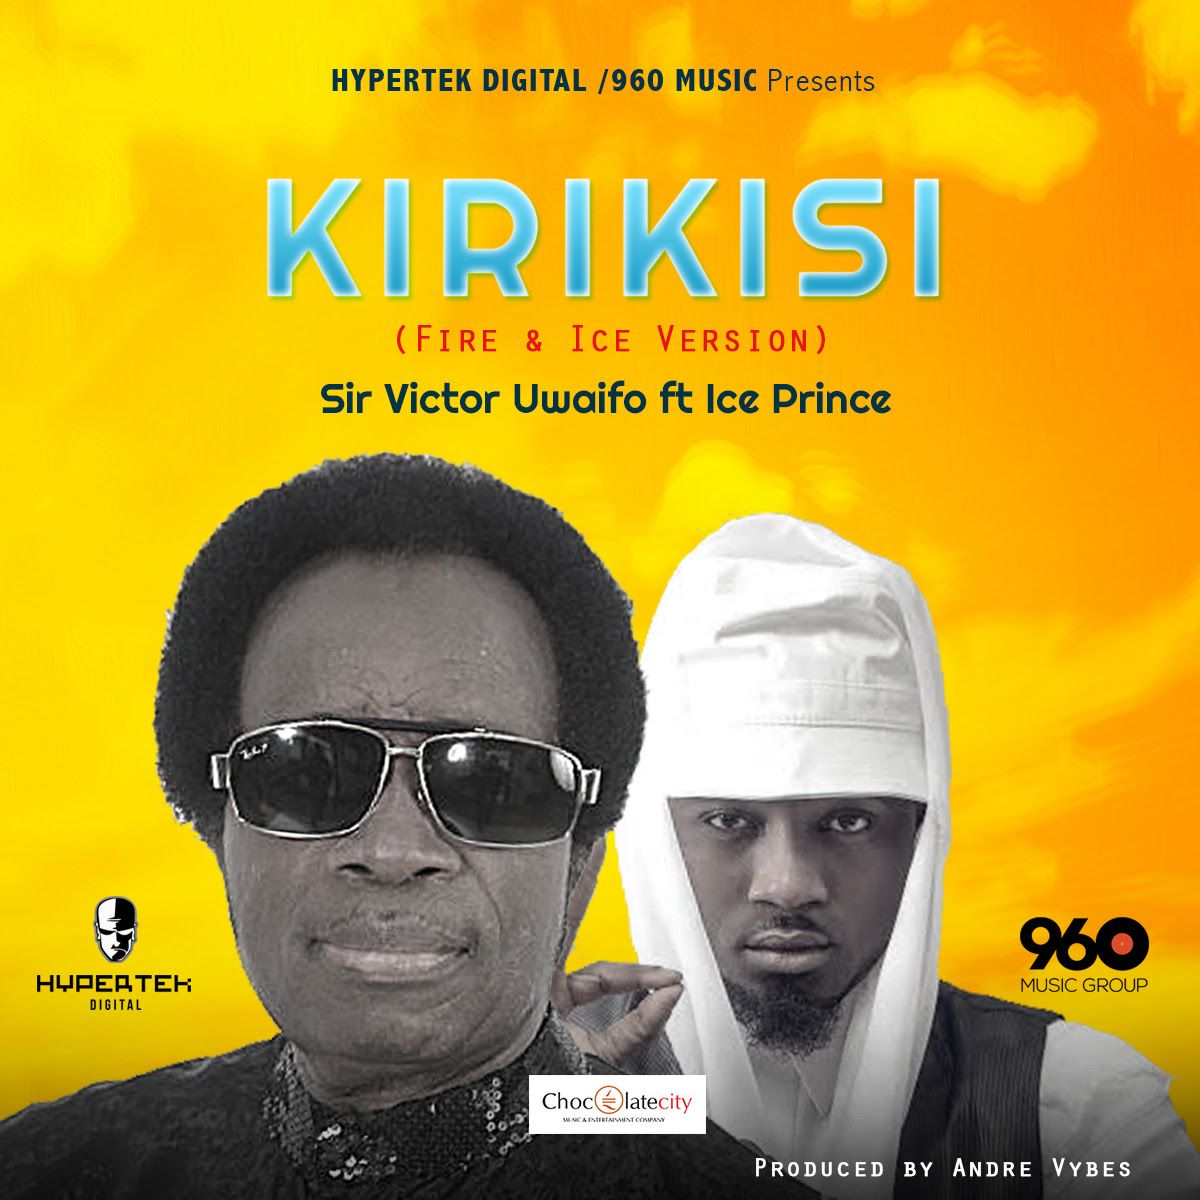 Sir Victor Uwaifo ft. Ice Prince - KIRIKISI [Fire & Ice Version ~ prod. by Andre Vybes] Artwork | AceWorldTeam.com